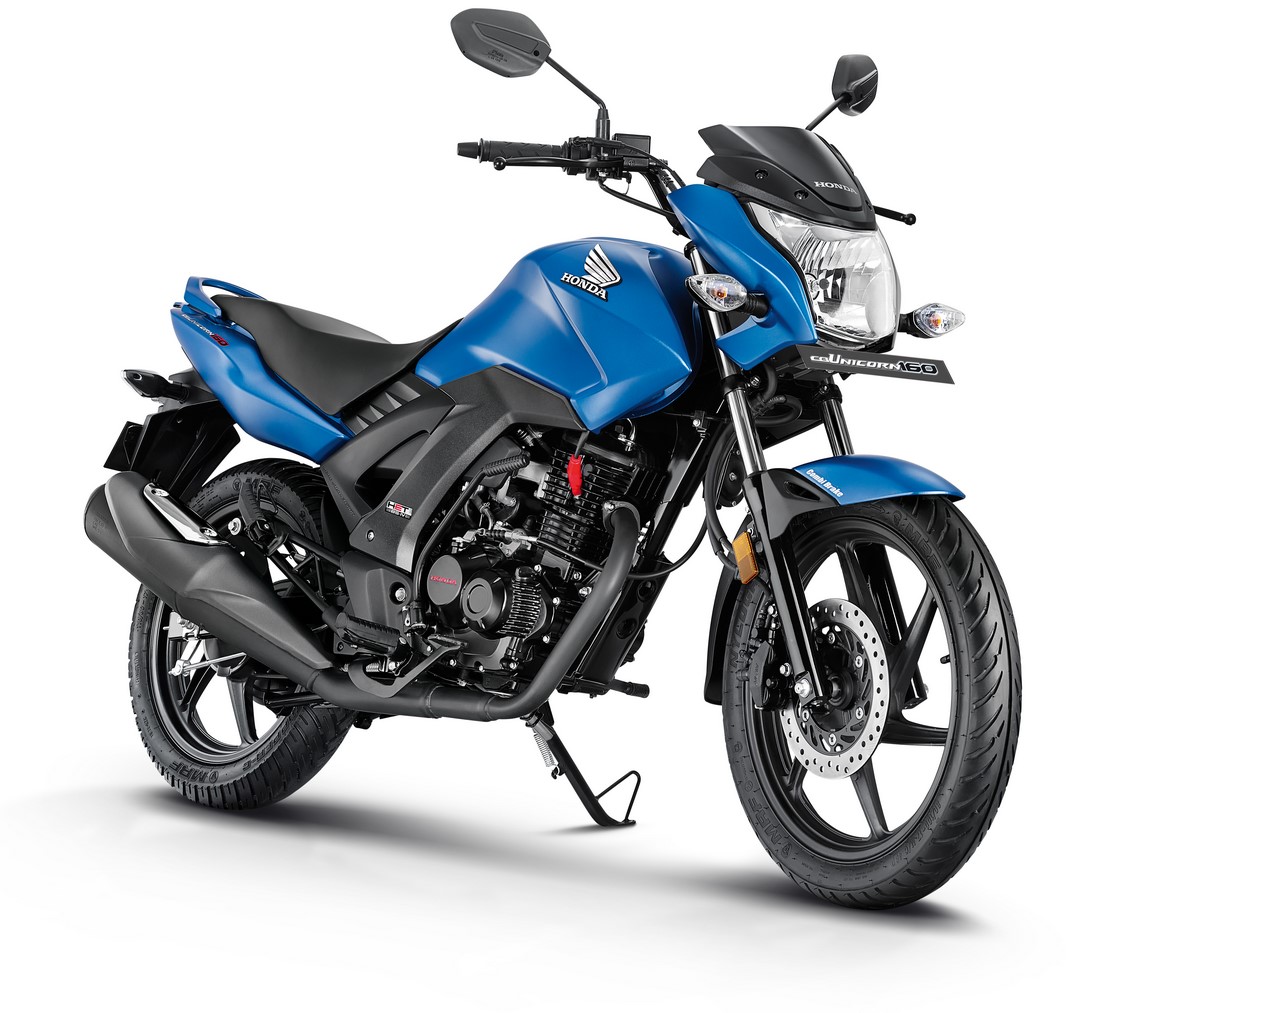 2017 Honda Unicorn 160 BS4 launched at INR 73,552